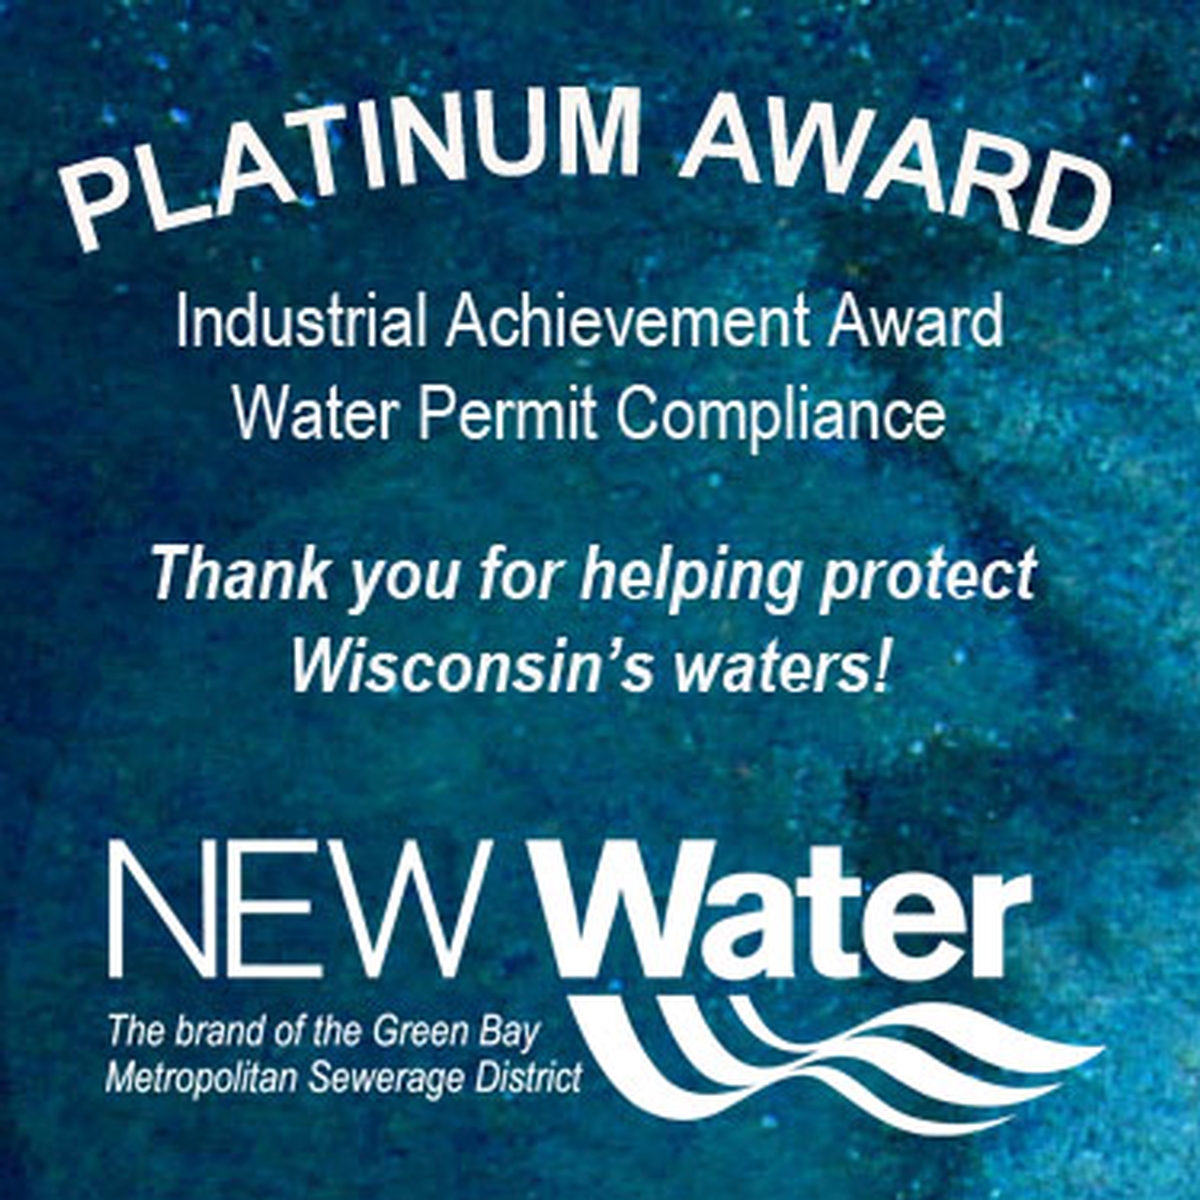 Bay Towel is a recipient of NEW Water’s Platinum Industrial Achievement Award